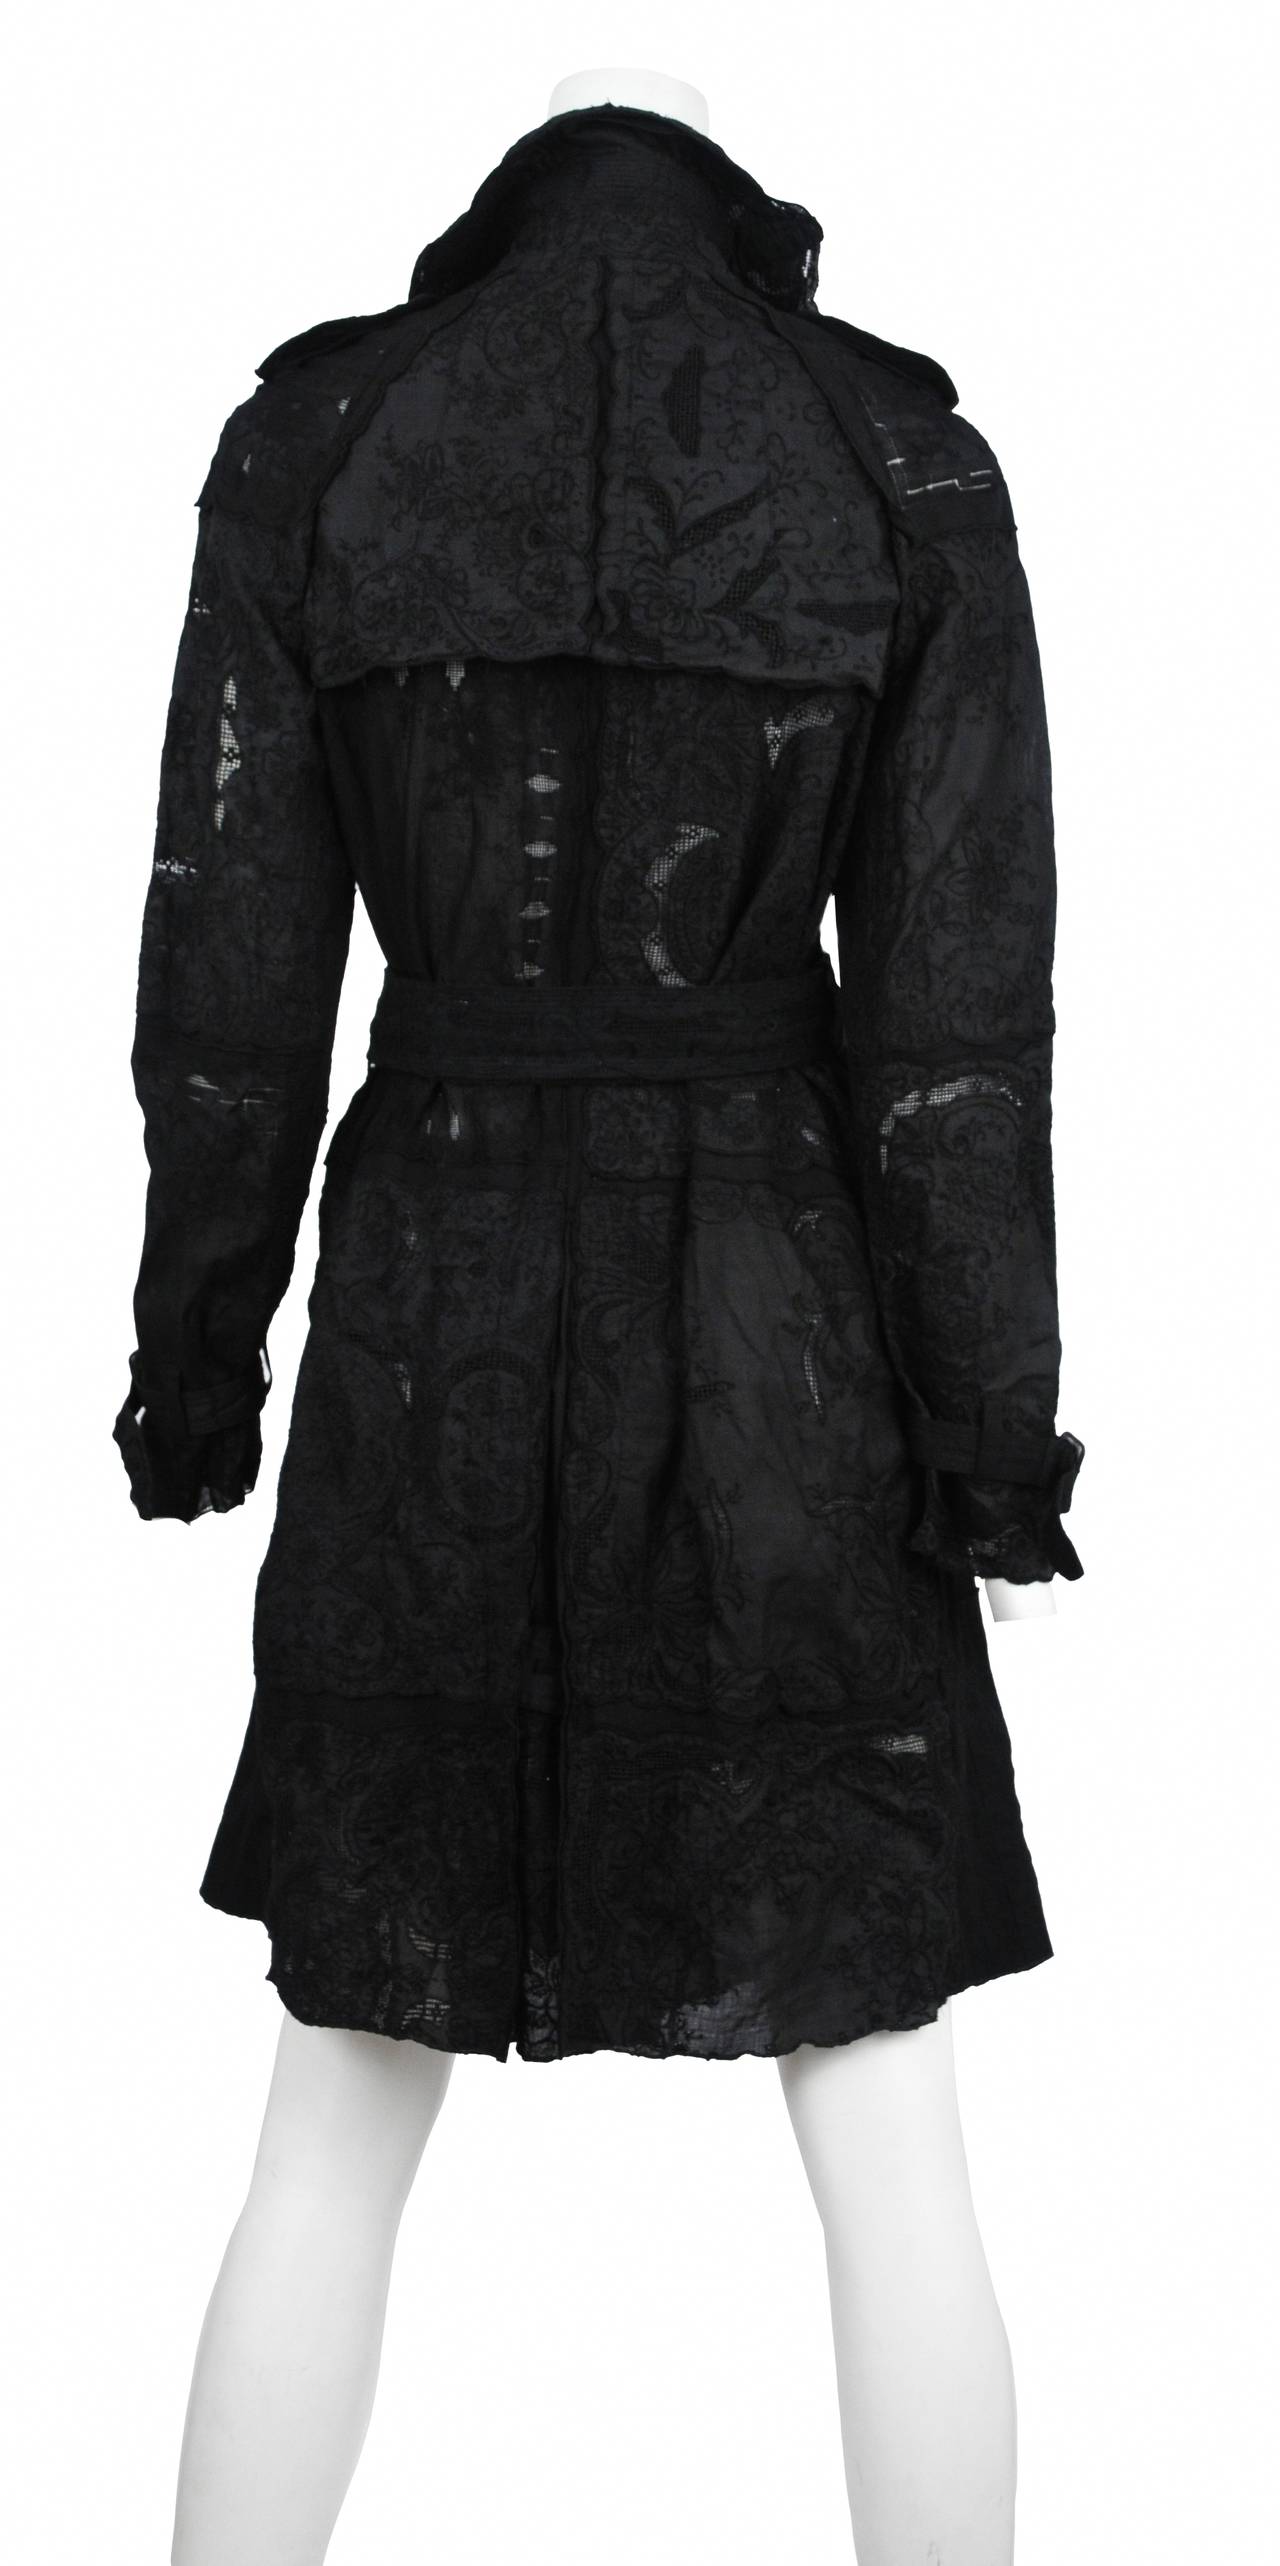 Vintage Comme des Garcons black embroidered trench coat with epaulets at shoulders, flap pockets at sides, vent at back, belt at waist and front double-breasted button closures.